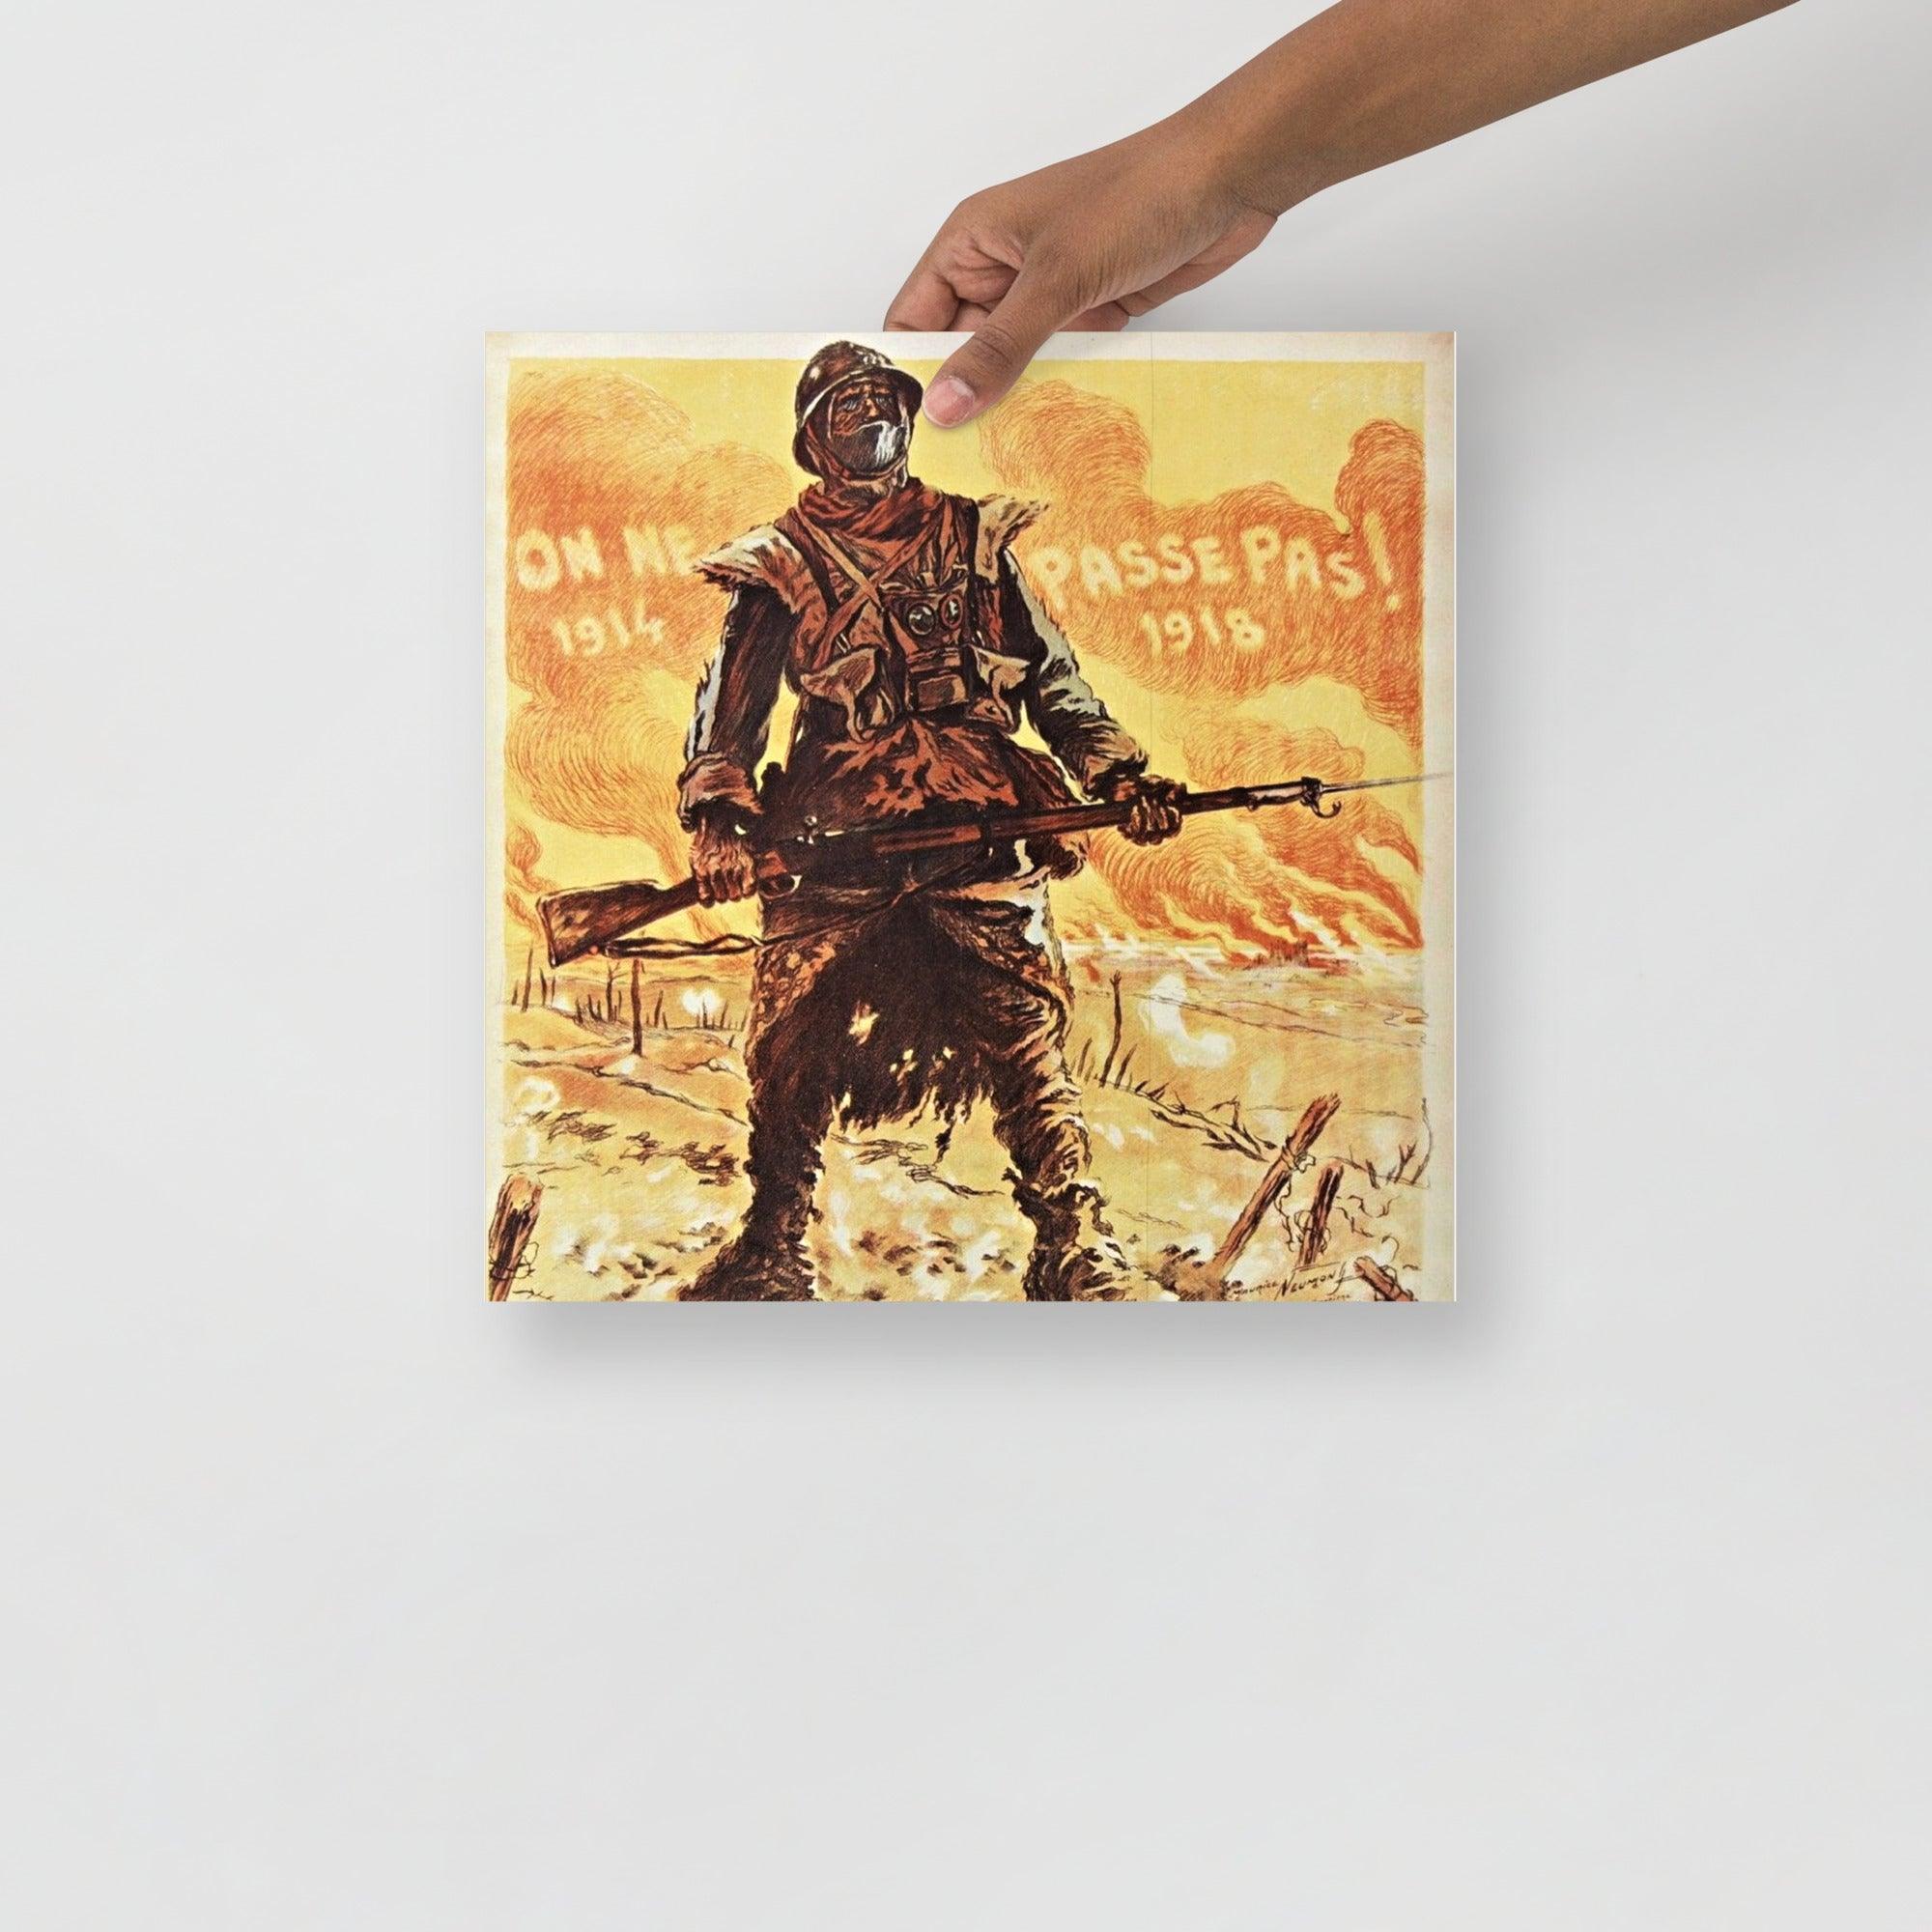 A They Shall Not Pass (On Ne Passe Pas) By Maurice Neumont poster on a plain backdrop in size 14x14”.